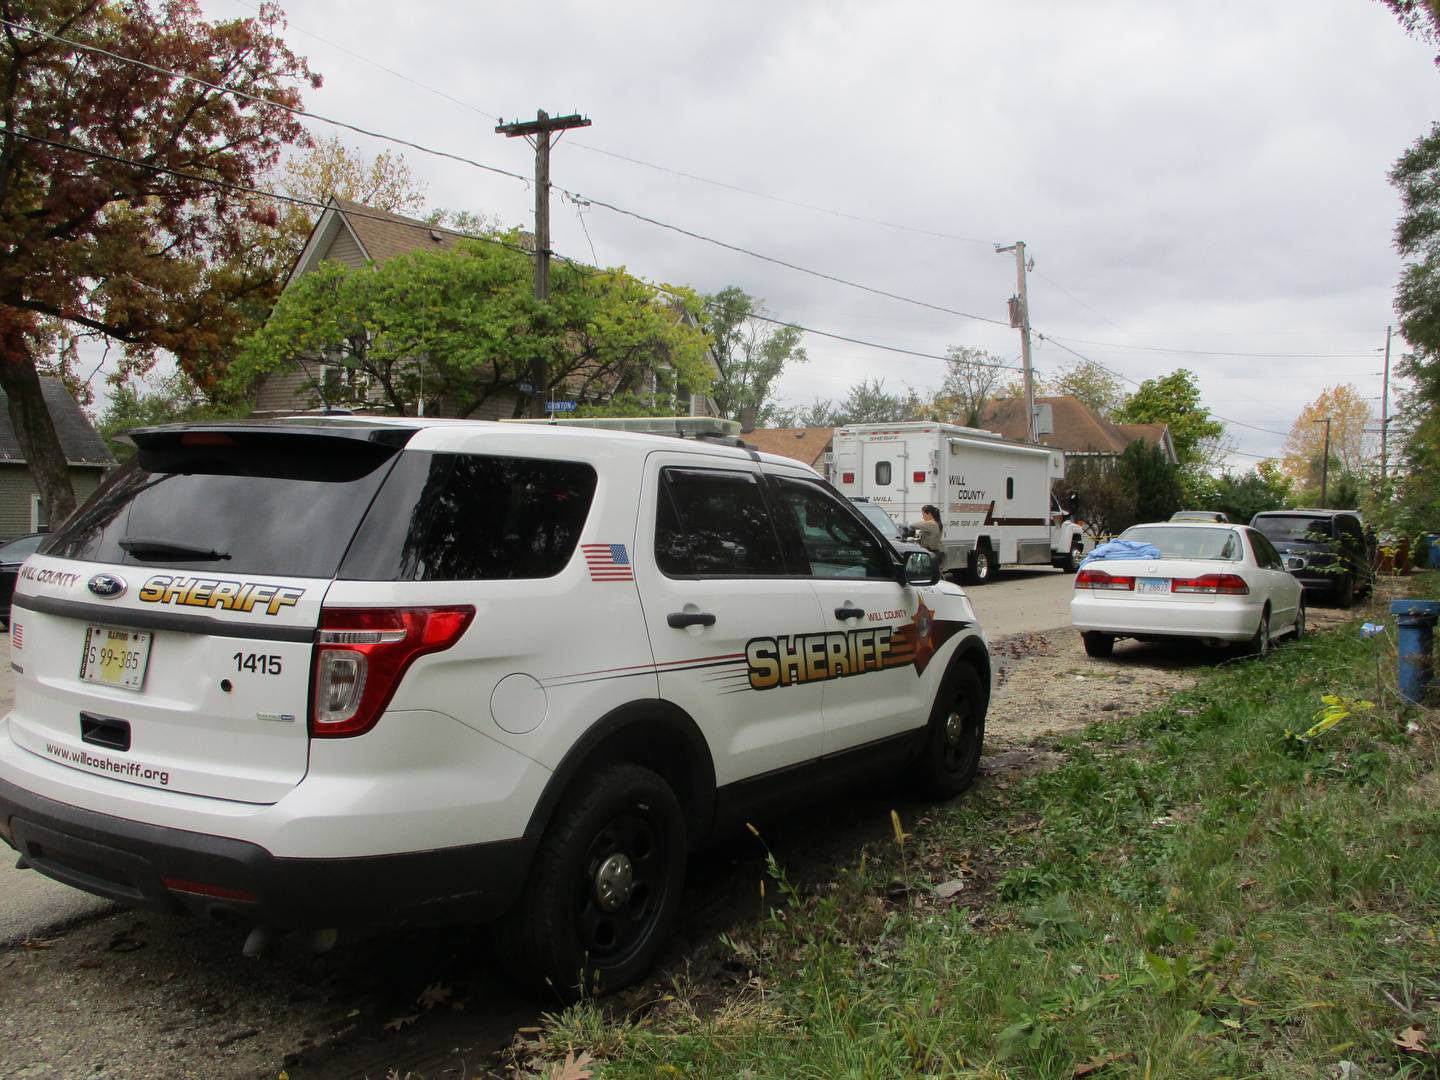 A Will County Sheriff's squad car parked on Sunday, Oct, 31, 2021 on East Jackson Street in Joliet Township where two people were killed and 10 wounded in a shooting at a Halloween Party at about 12:39 a.m.